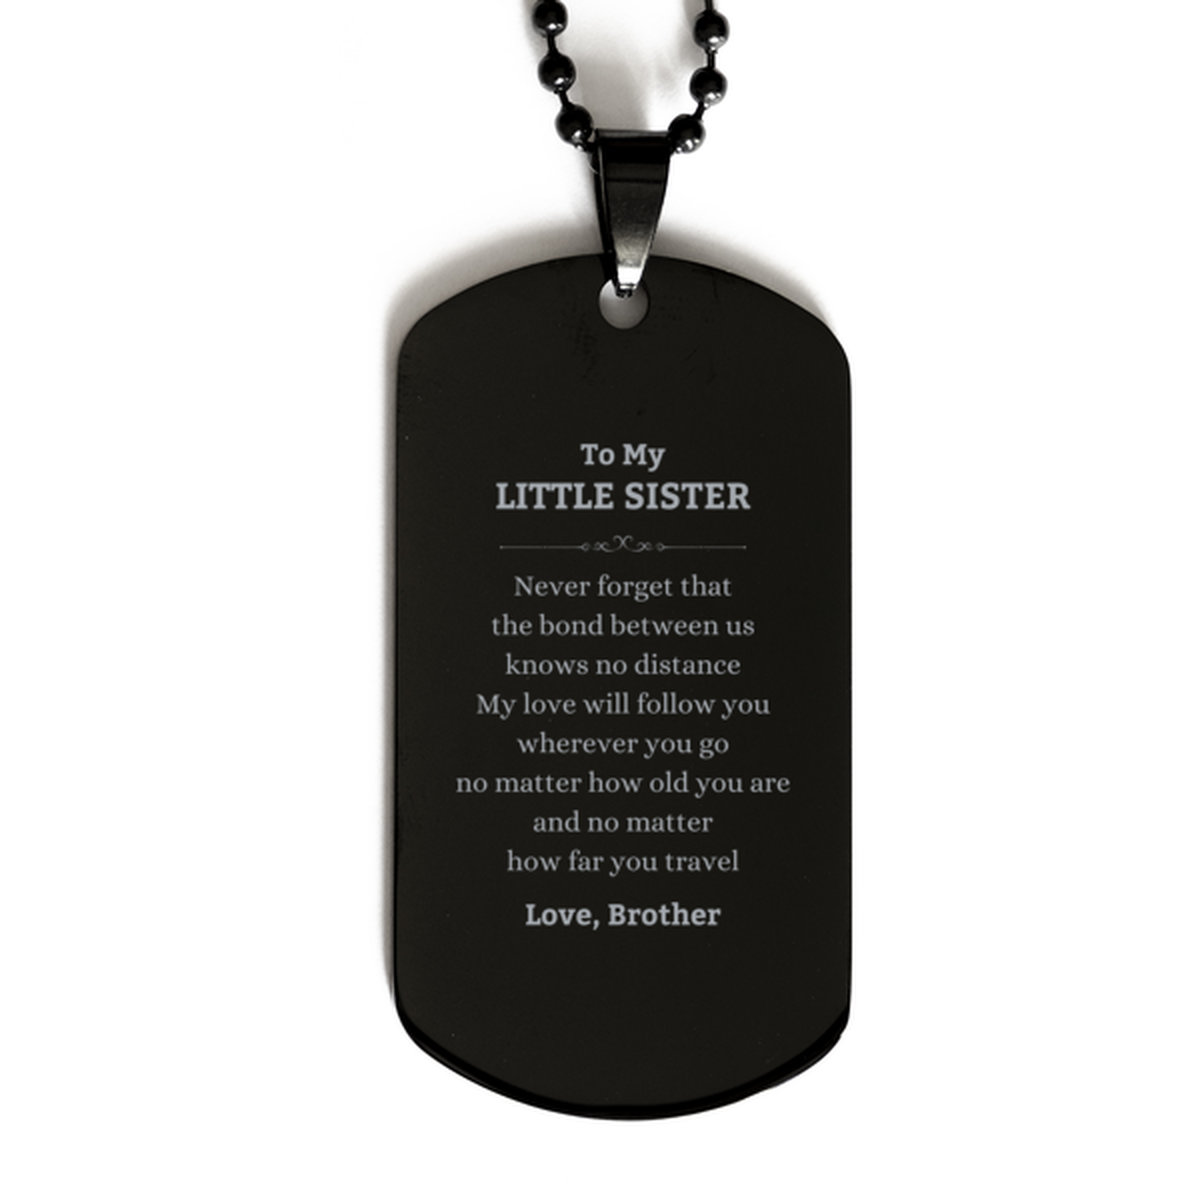 Little Sister Birthday Gifts from Brother, Adjustable Black Dog Tag for Little Sister Christmas Graduation Unique Gifts Little Sister Never forget that the bond between us knows no distance. Love, Brother